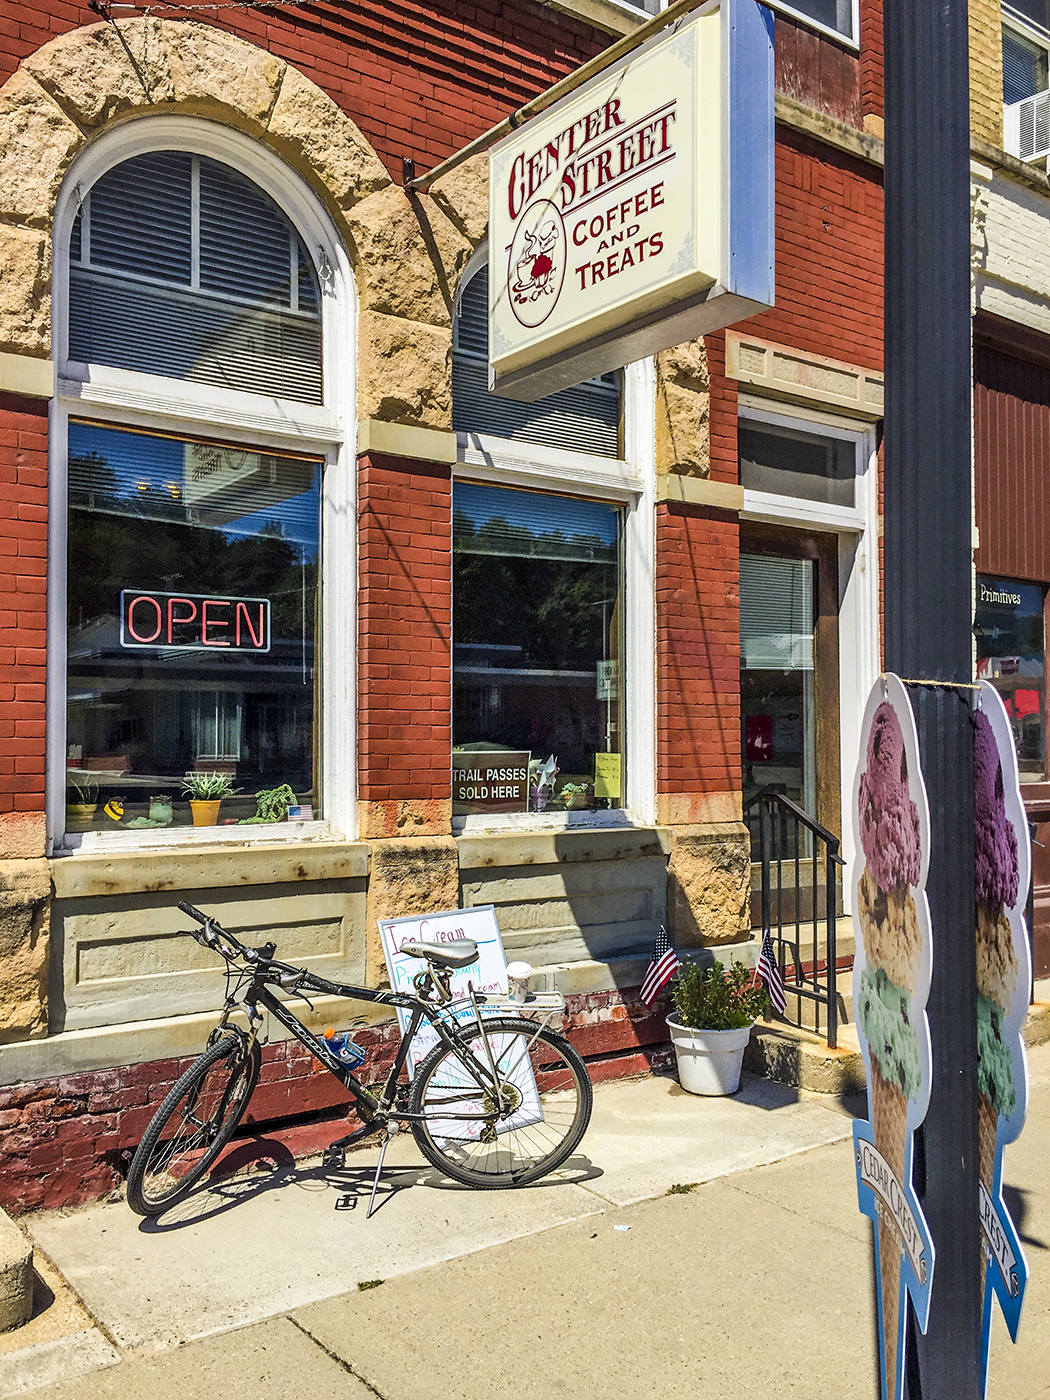 Center Street Treats in Wonewoc WI on the 400 State Trail